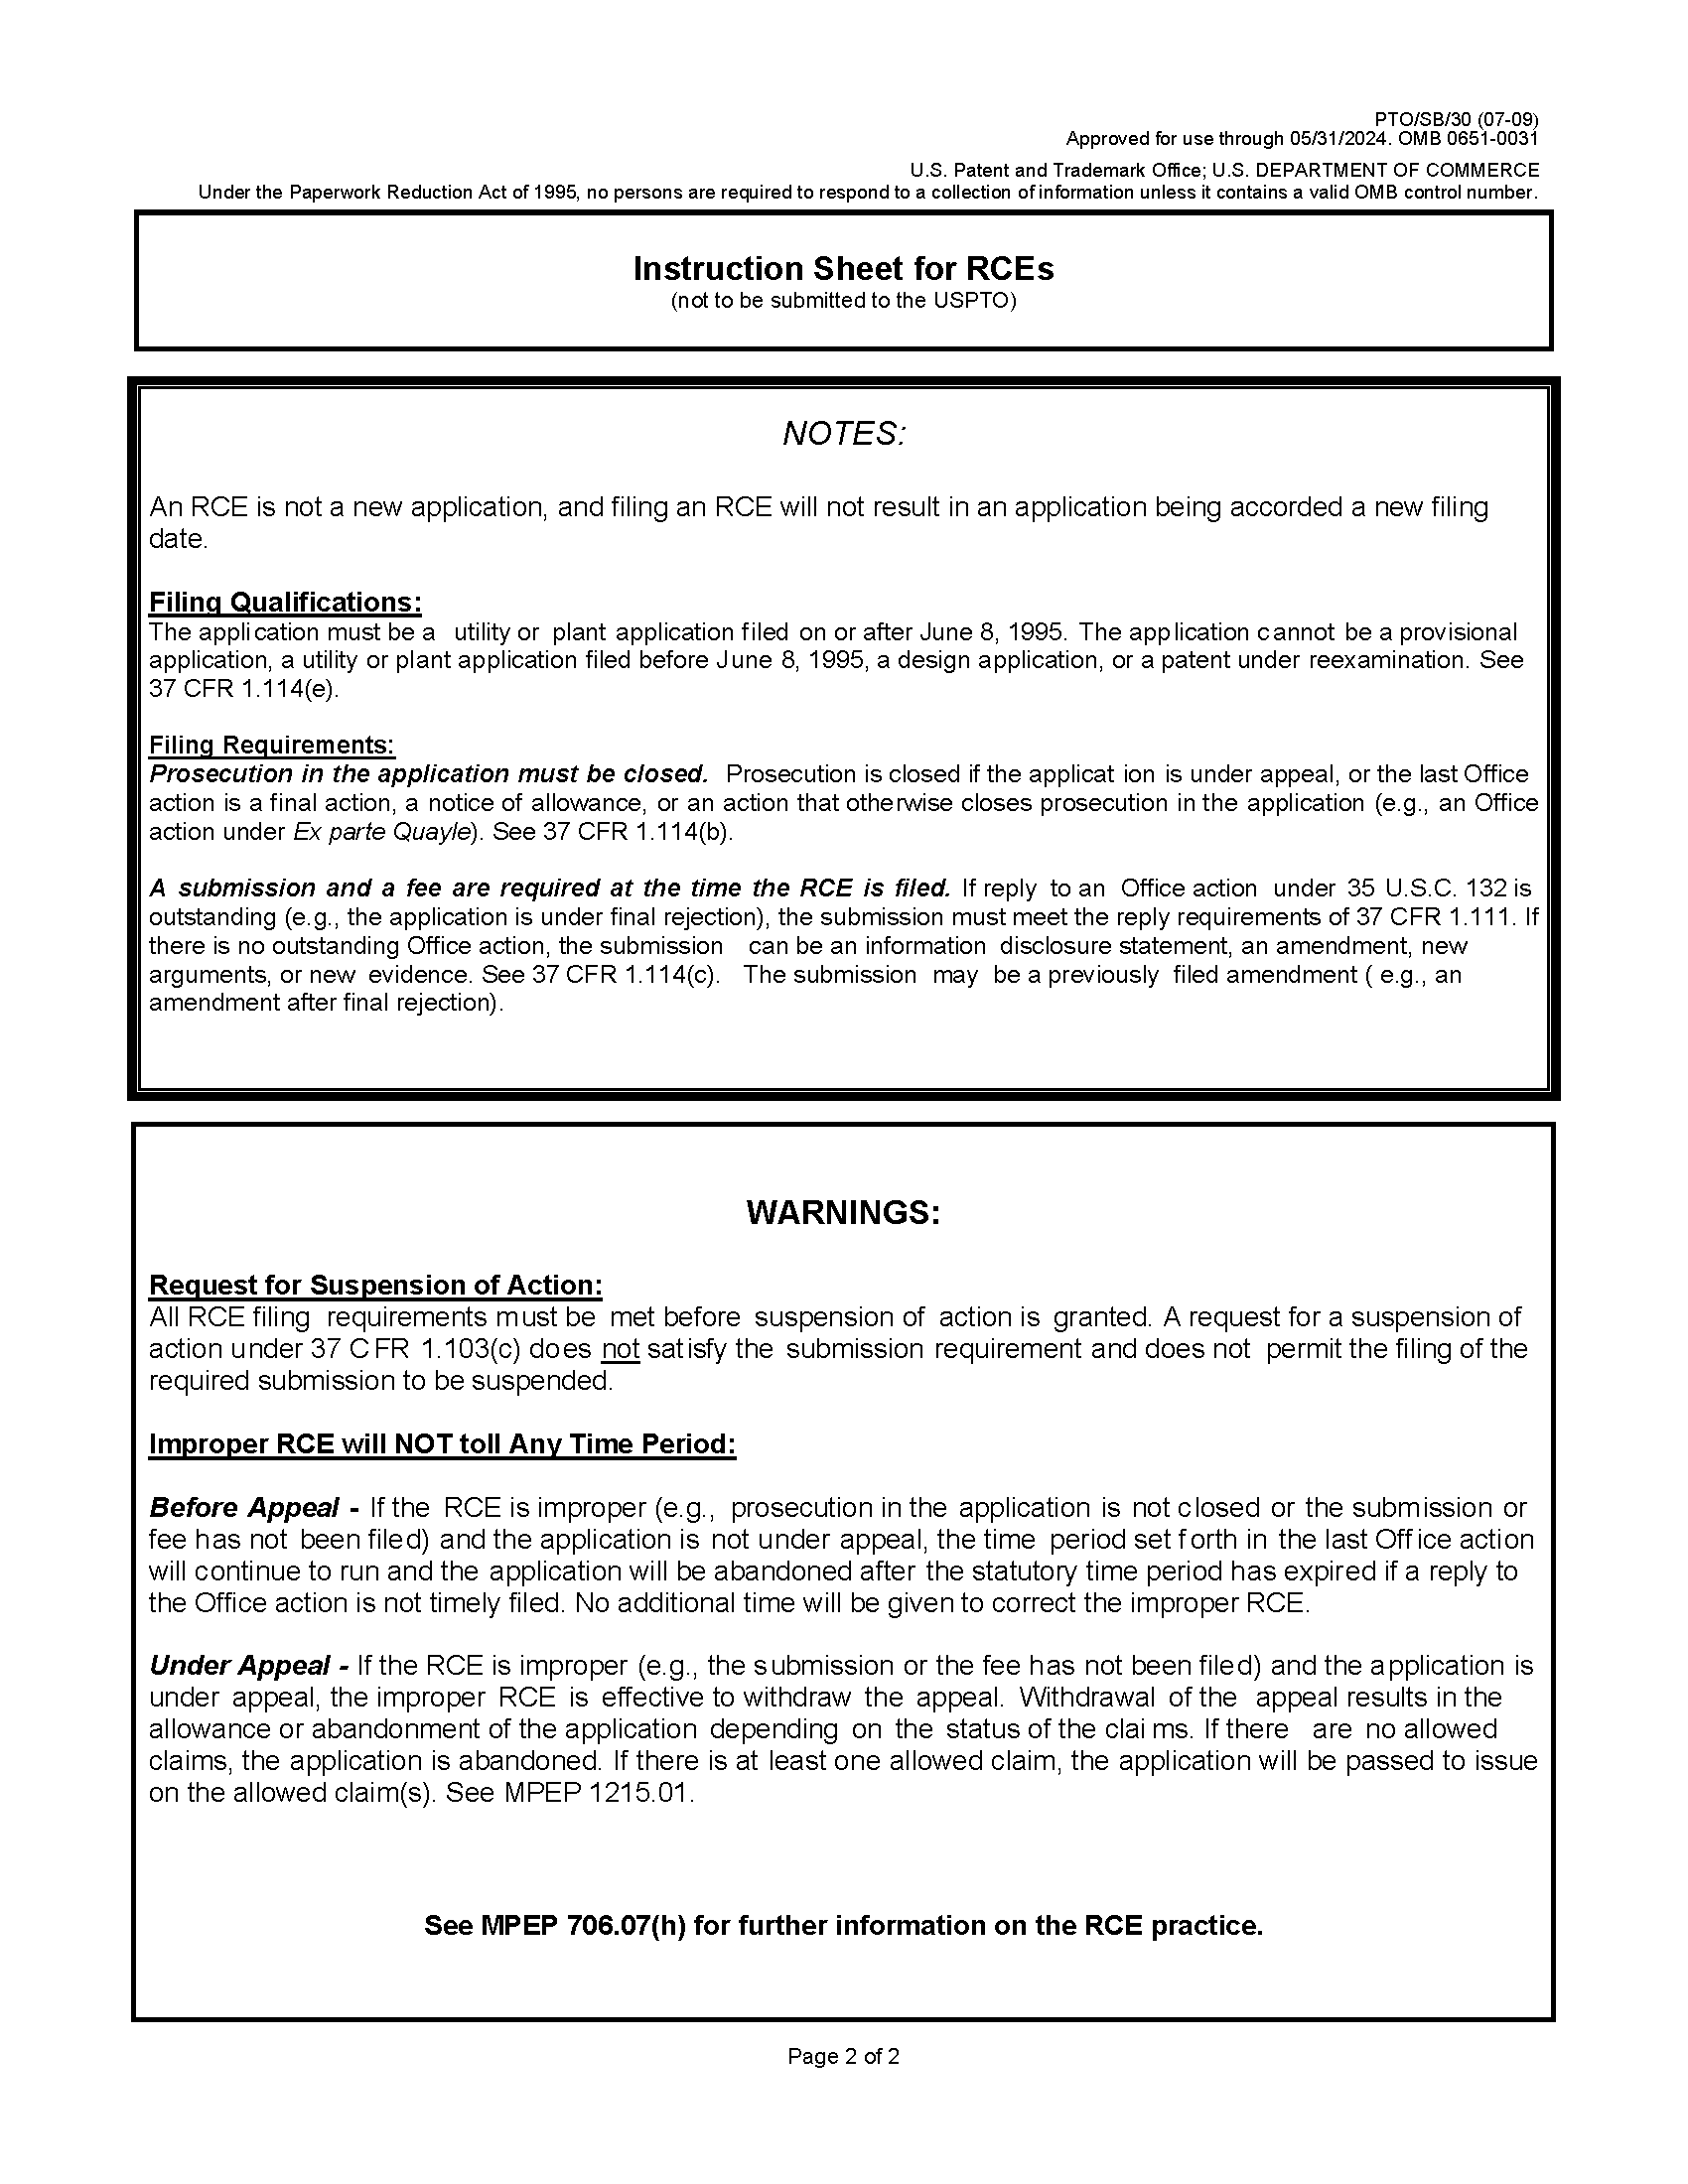 Form PTO/SB/30 Instruction Sheet for RCEs (not to be submitted to the USPTO)